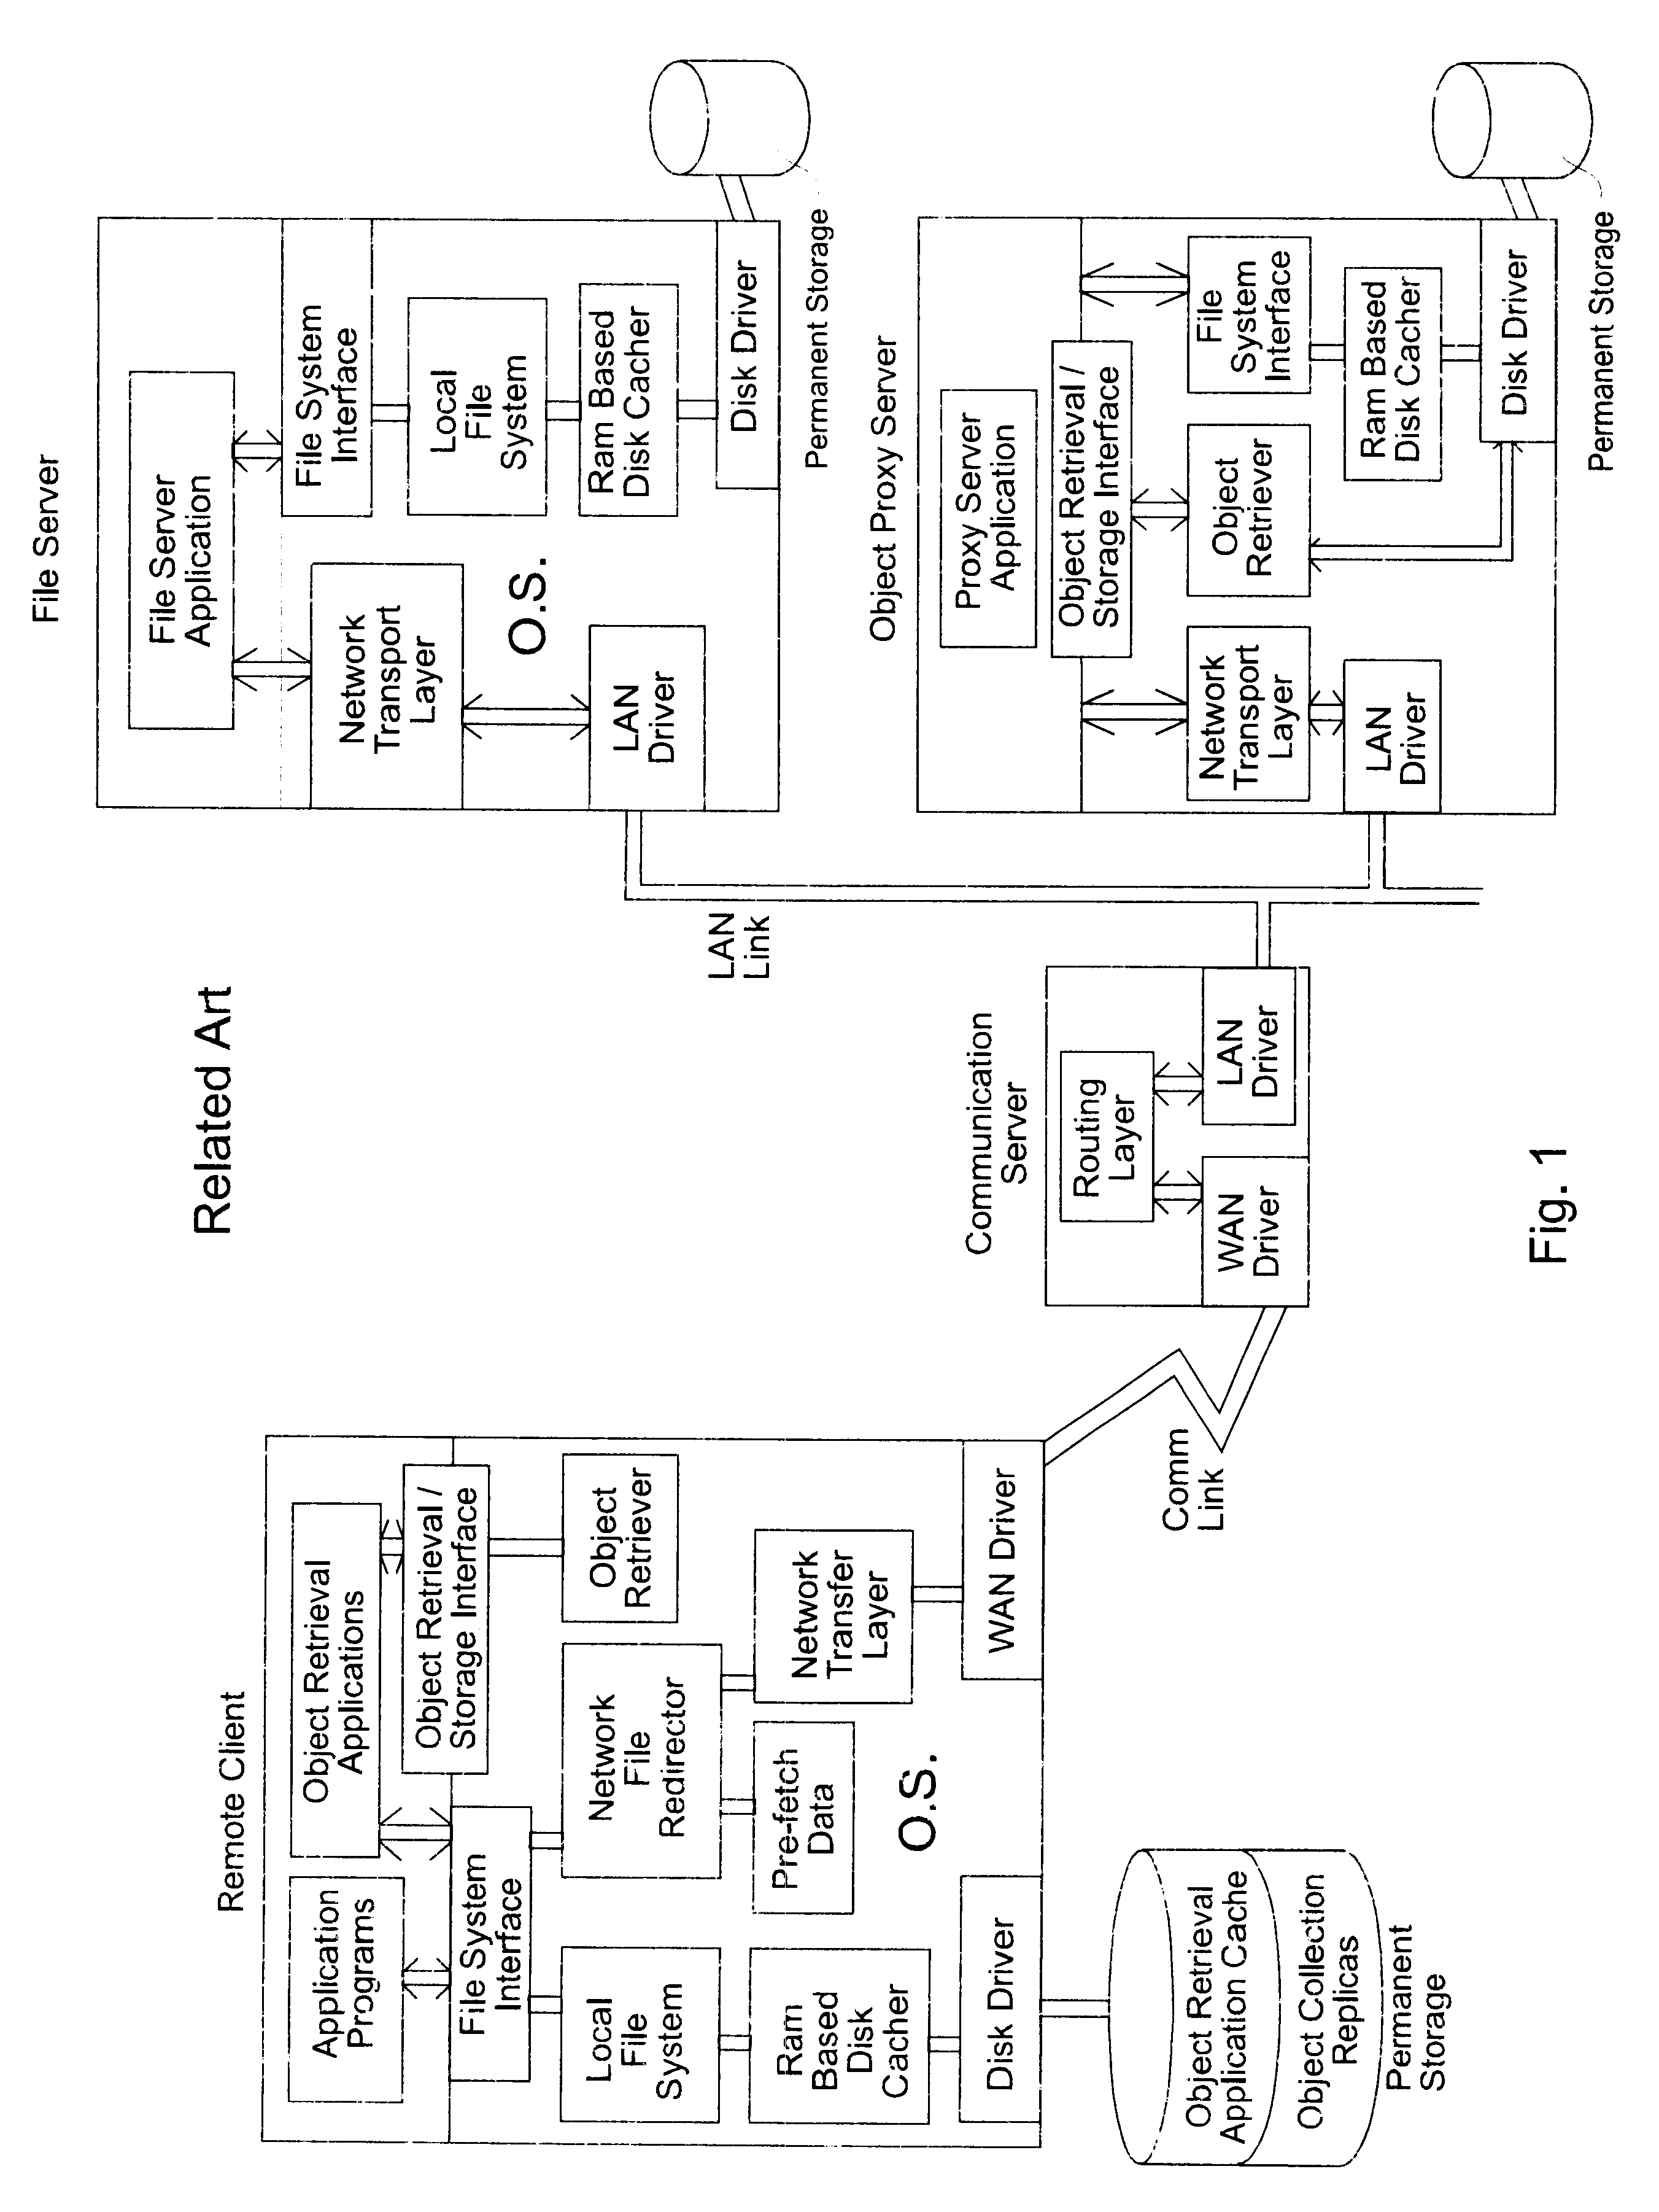 Apparatus and method for increasing speed in a network file/object oriented server/client system